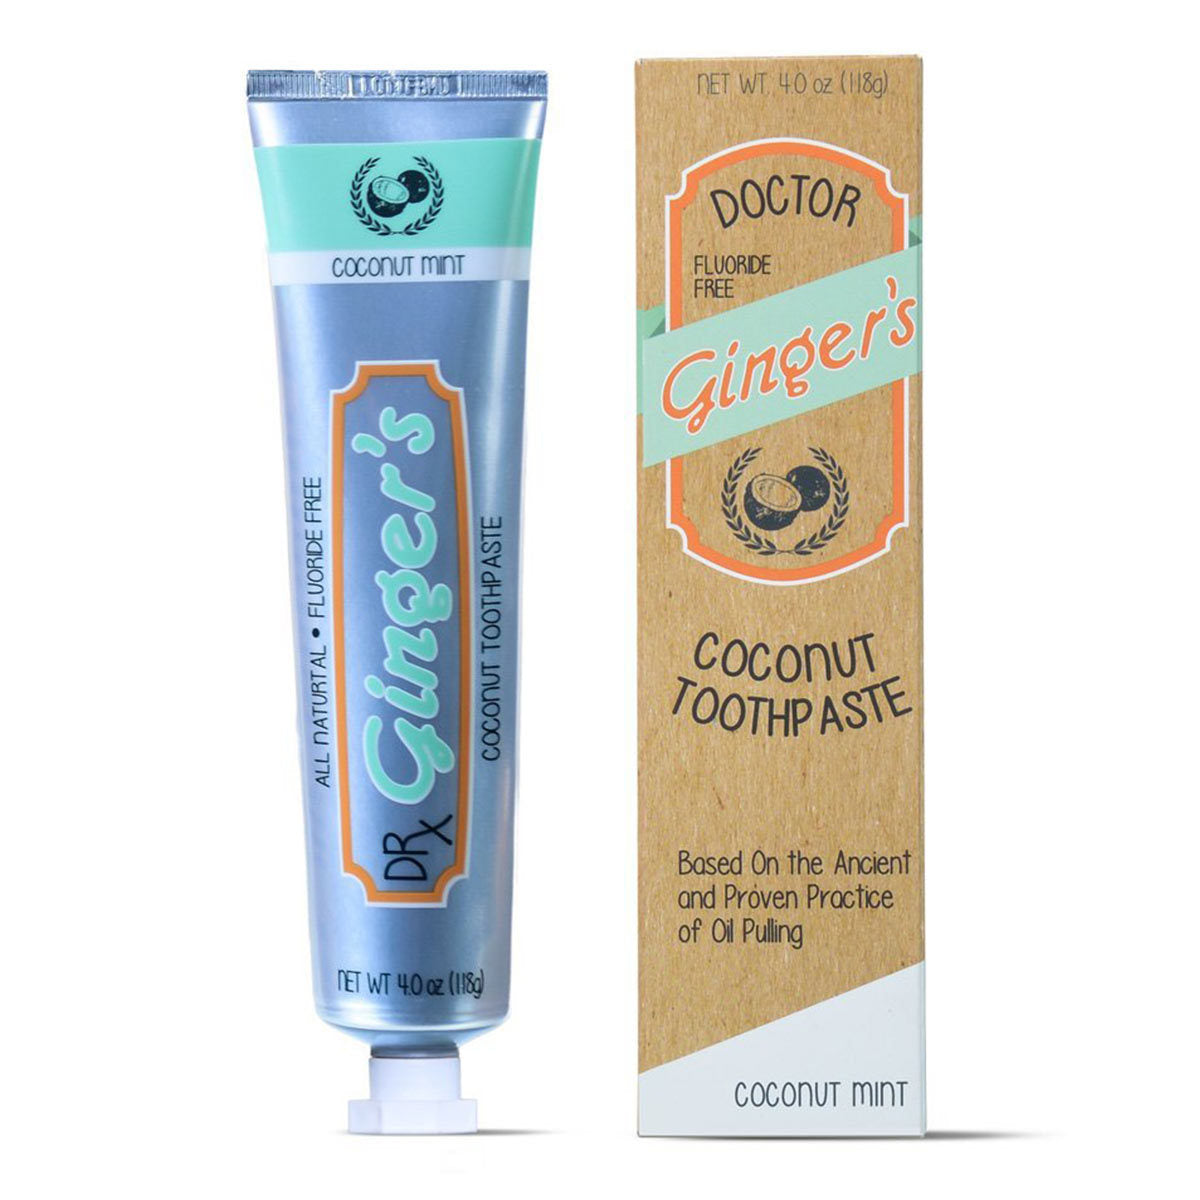 Primary image of Coconut Toothpaste